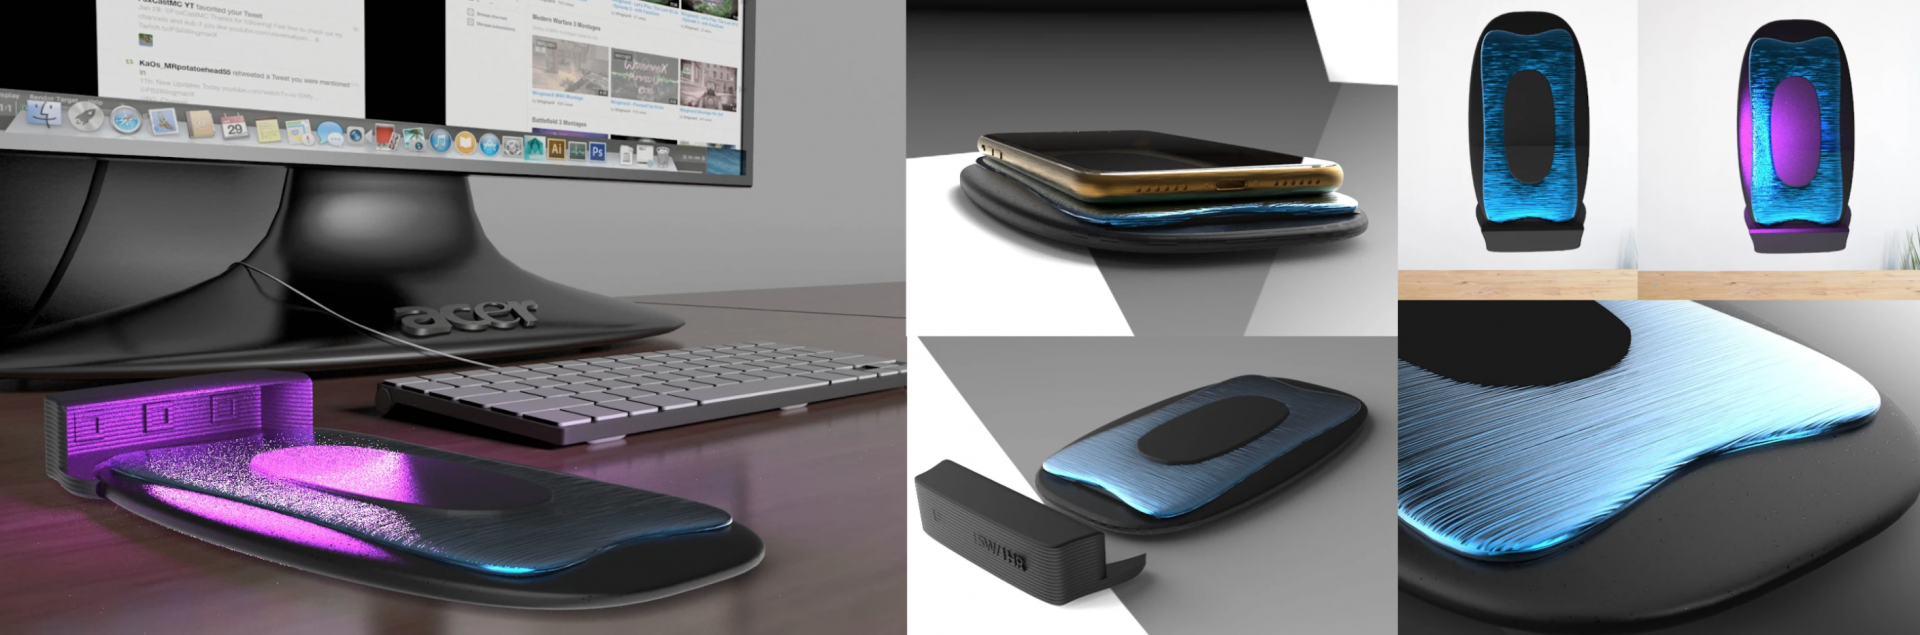 Several renders of a flat, rectangular electronic device. 